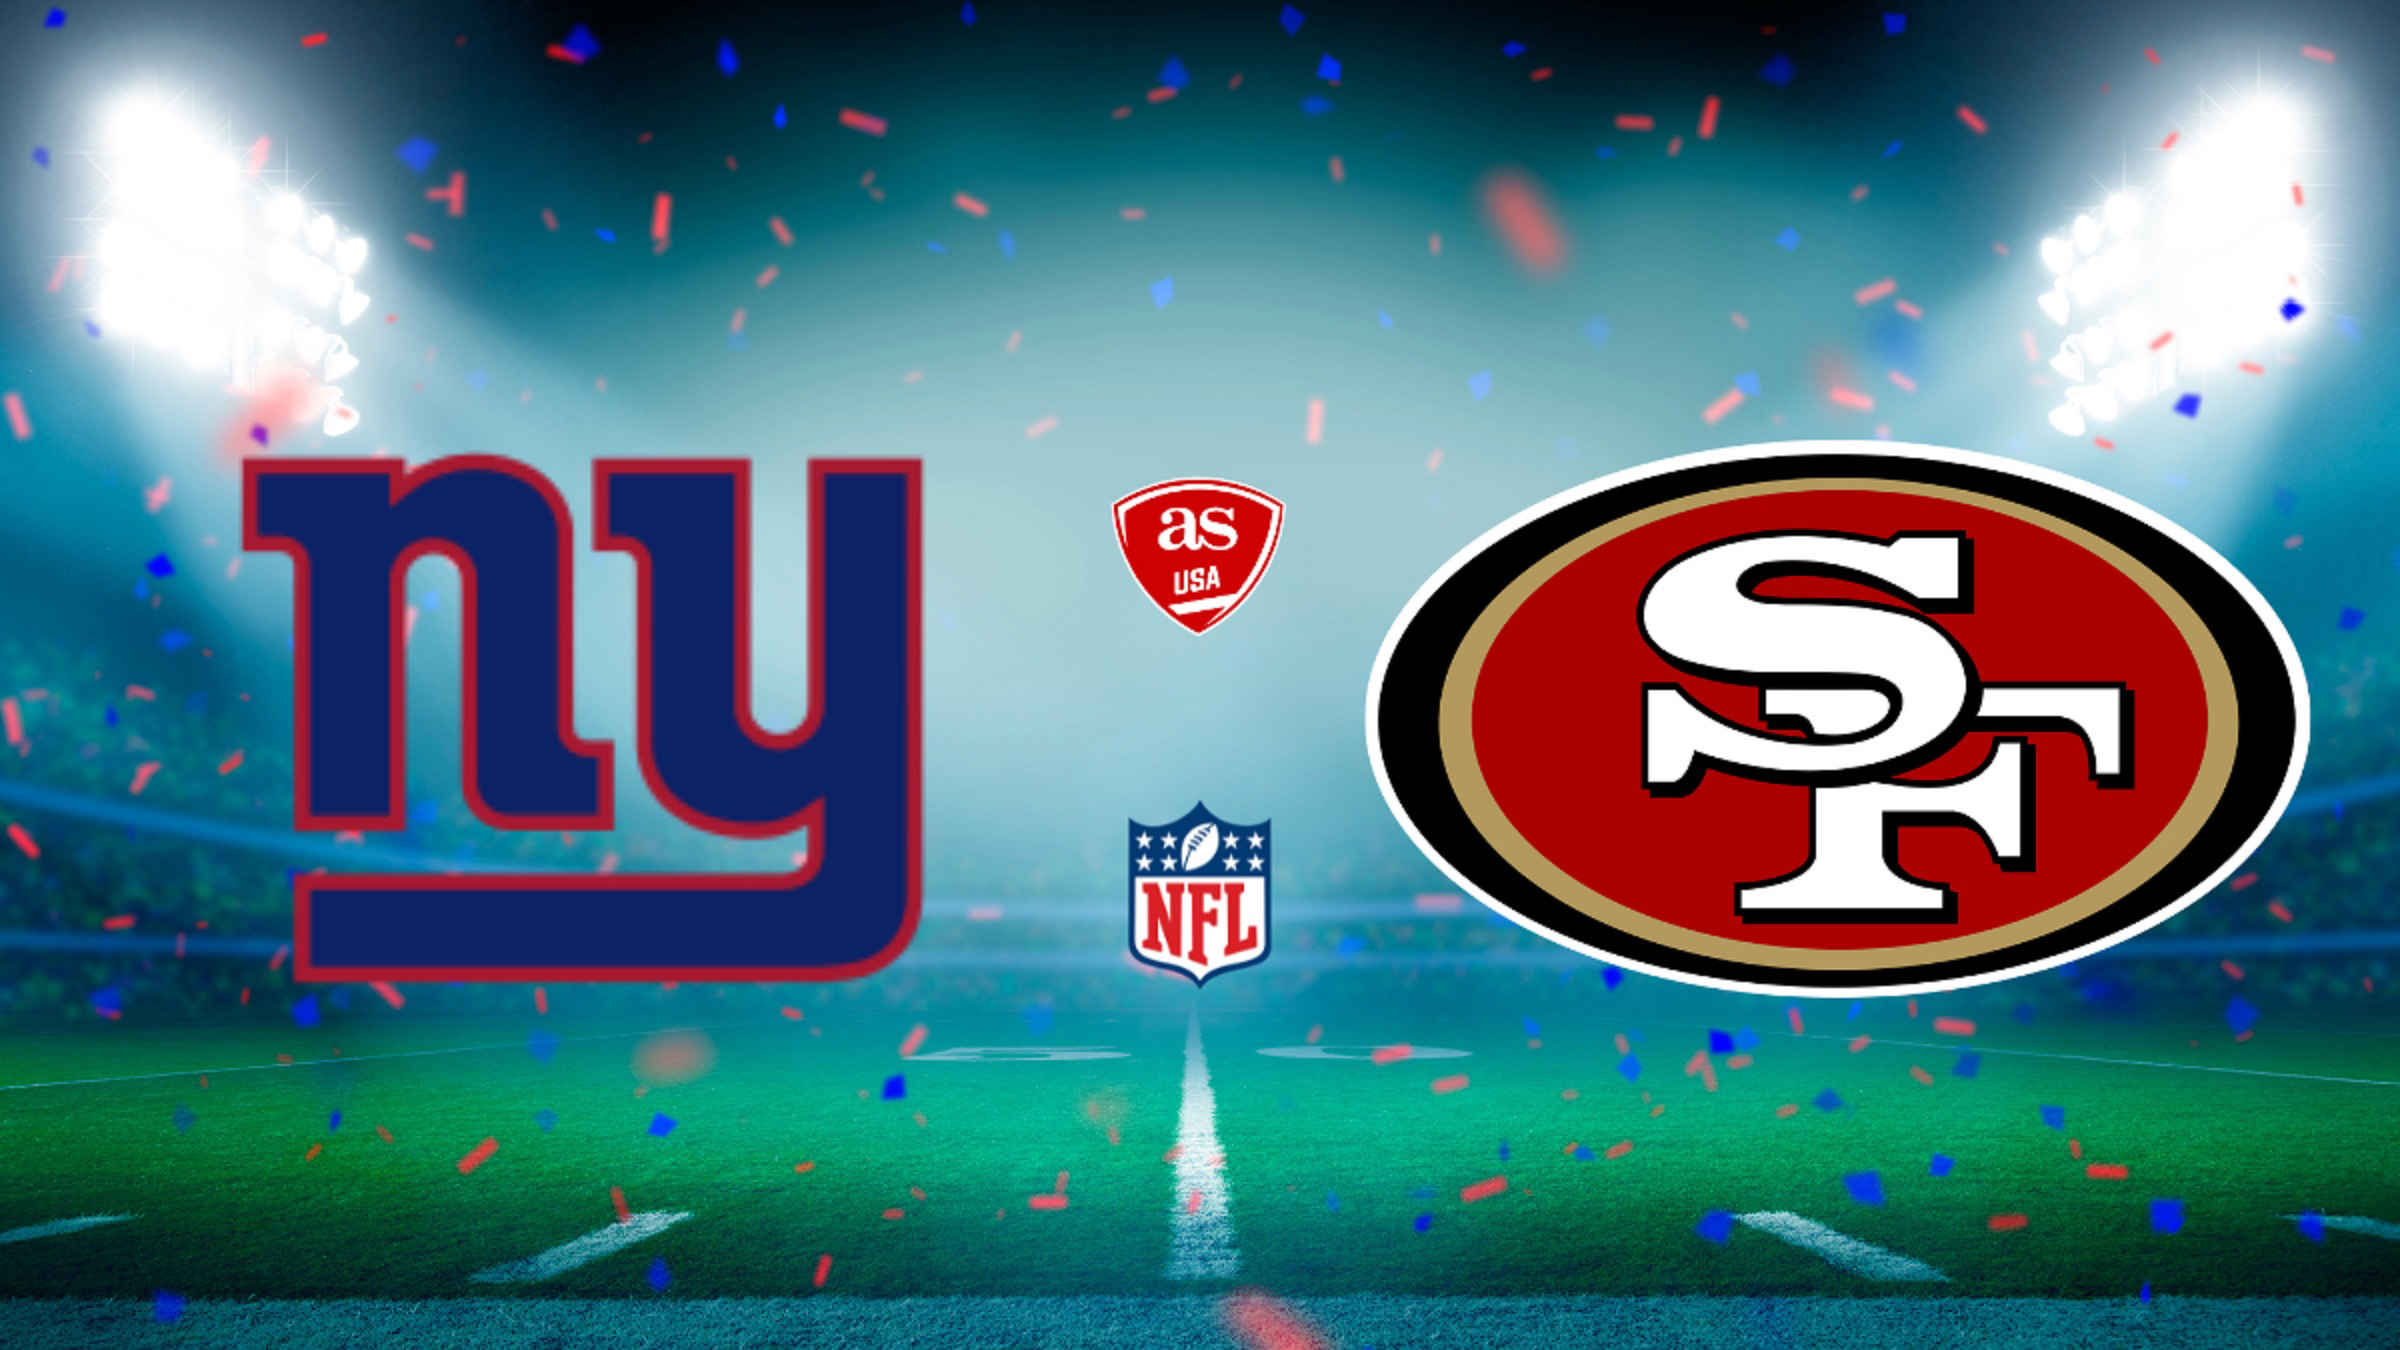 New York Giants vs San Francisco 49ers times, how to watch on TV